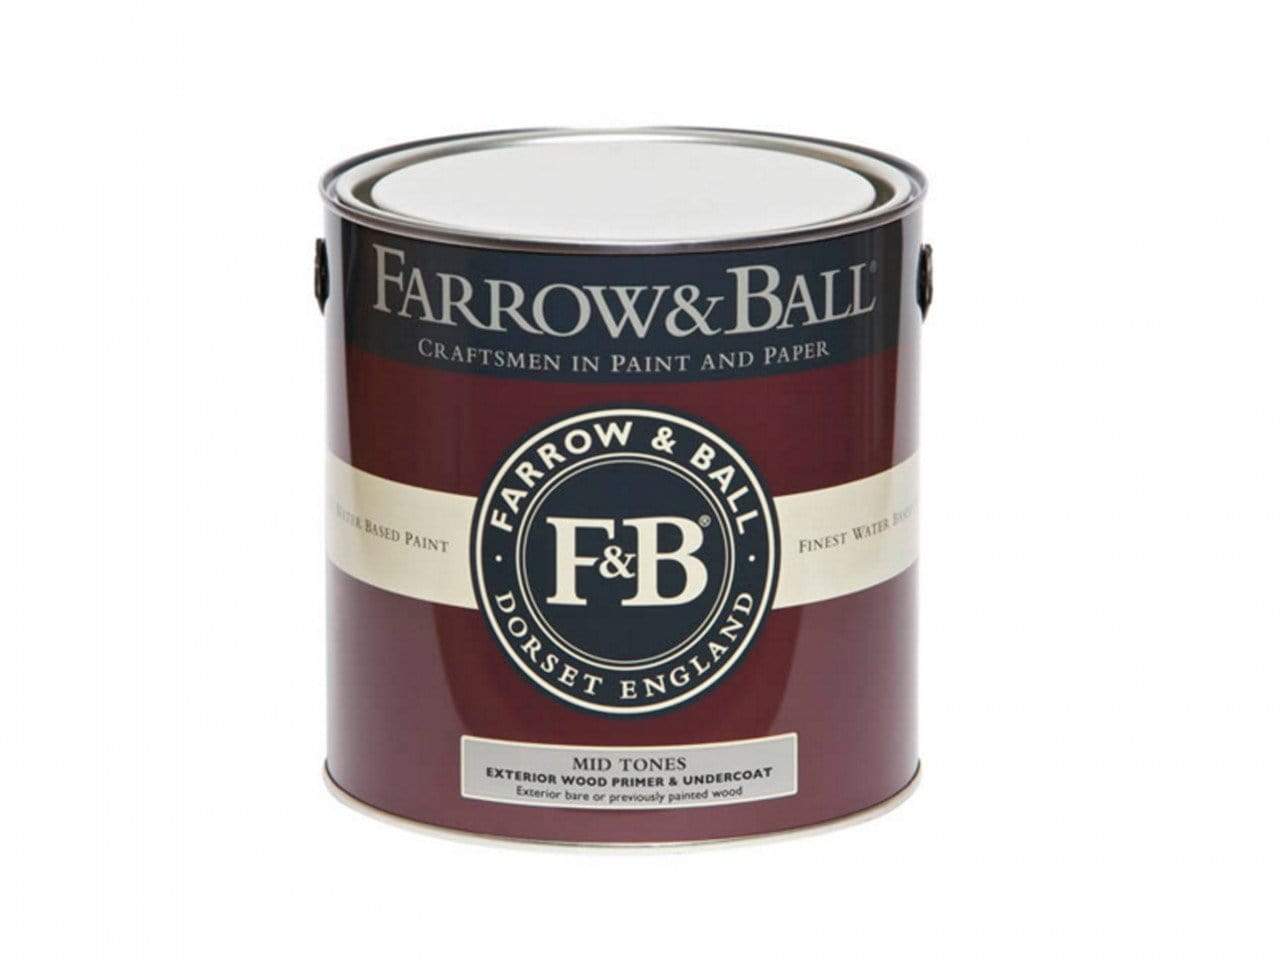 Paint  -  Farrow And Ball 750Ml Exterior Wood Primer And Undercoat Light Tones  -  50124512